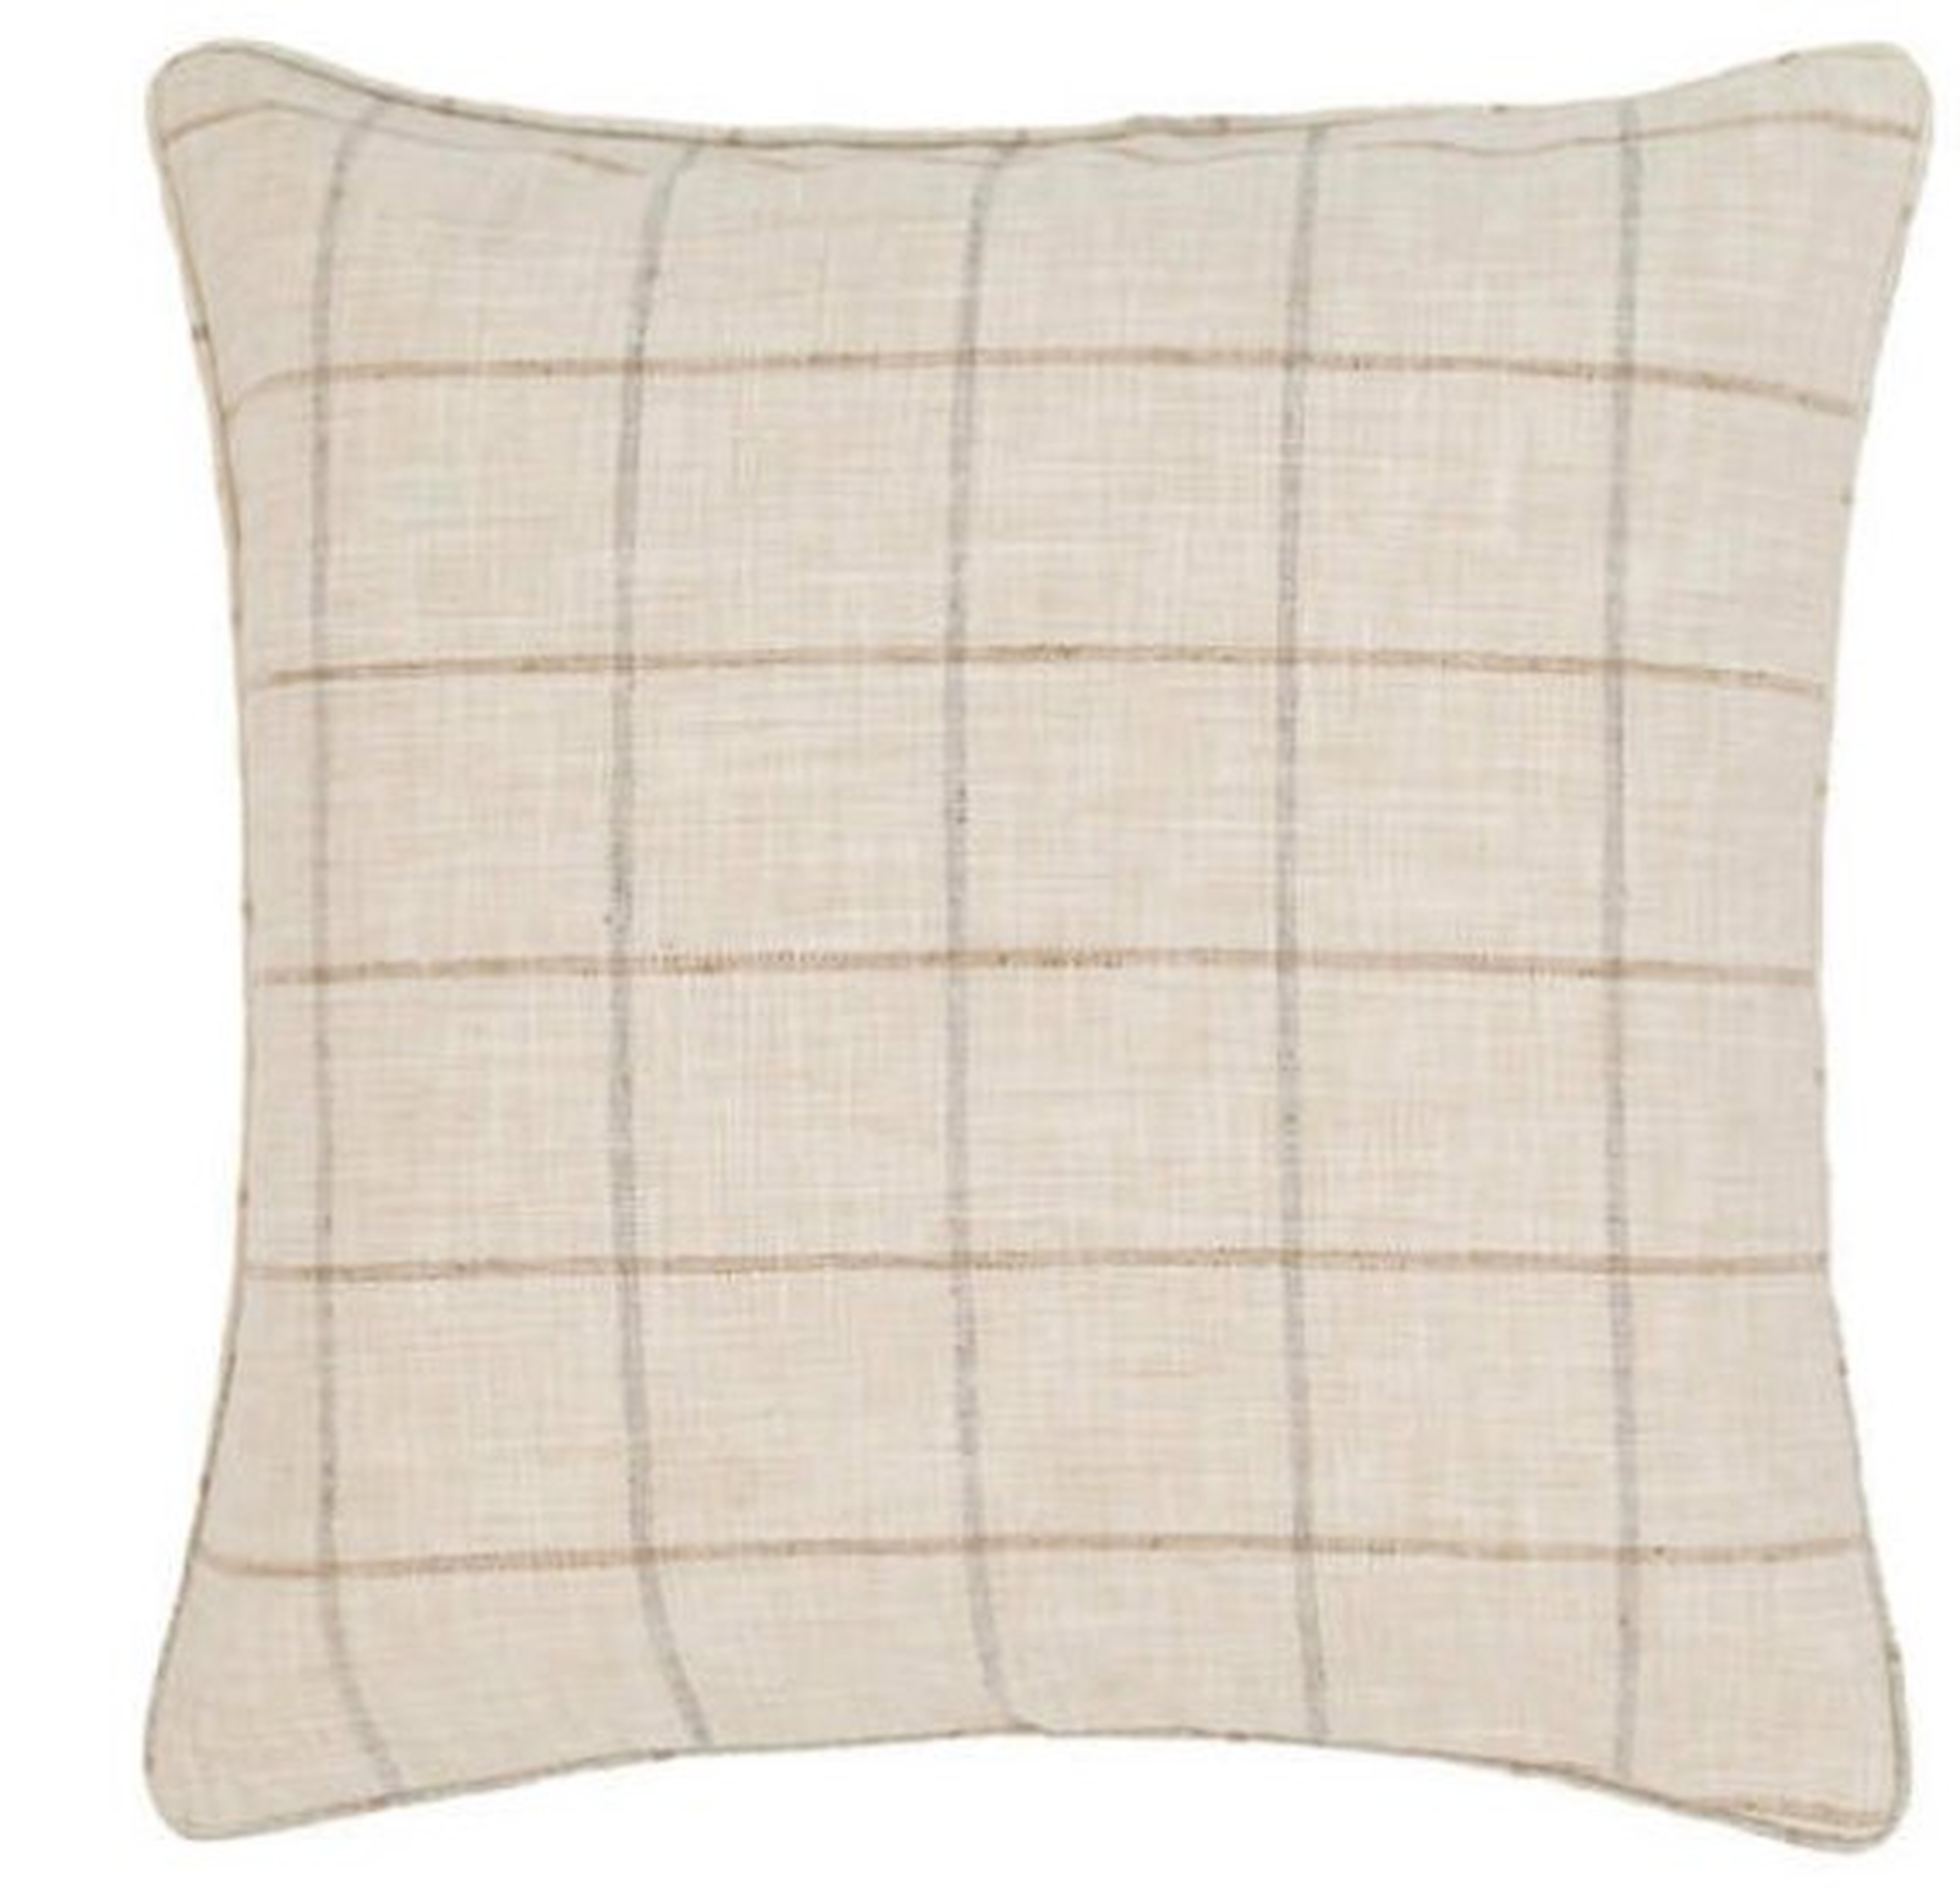 CHATHAM TATTERSALL NATURAL/GREY INDOOR/OUTDOOR DECORATIVE PILLOW - Dash and Albert